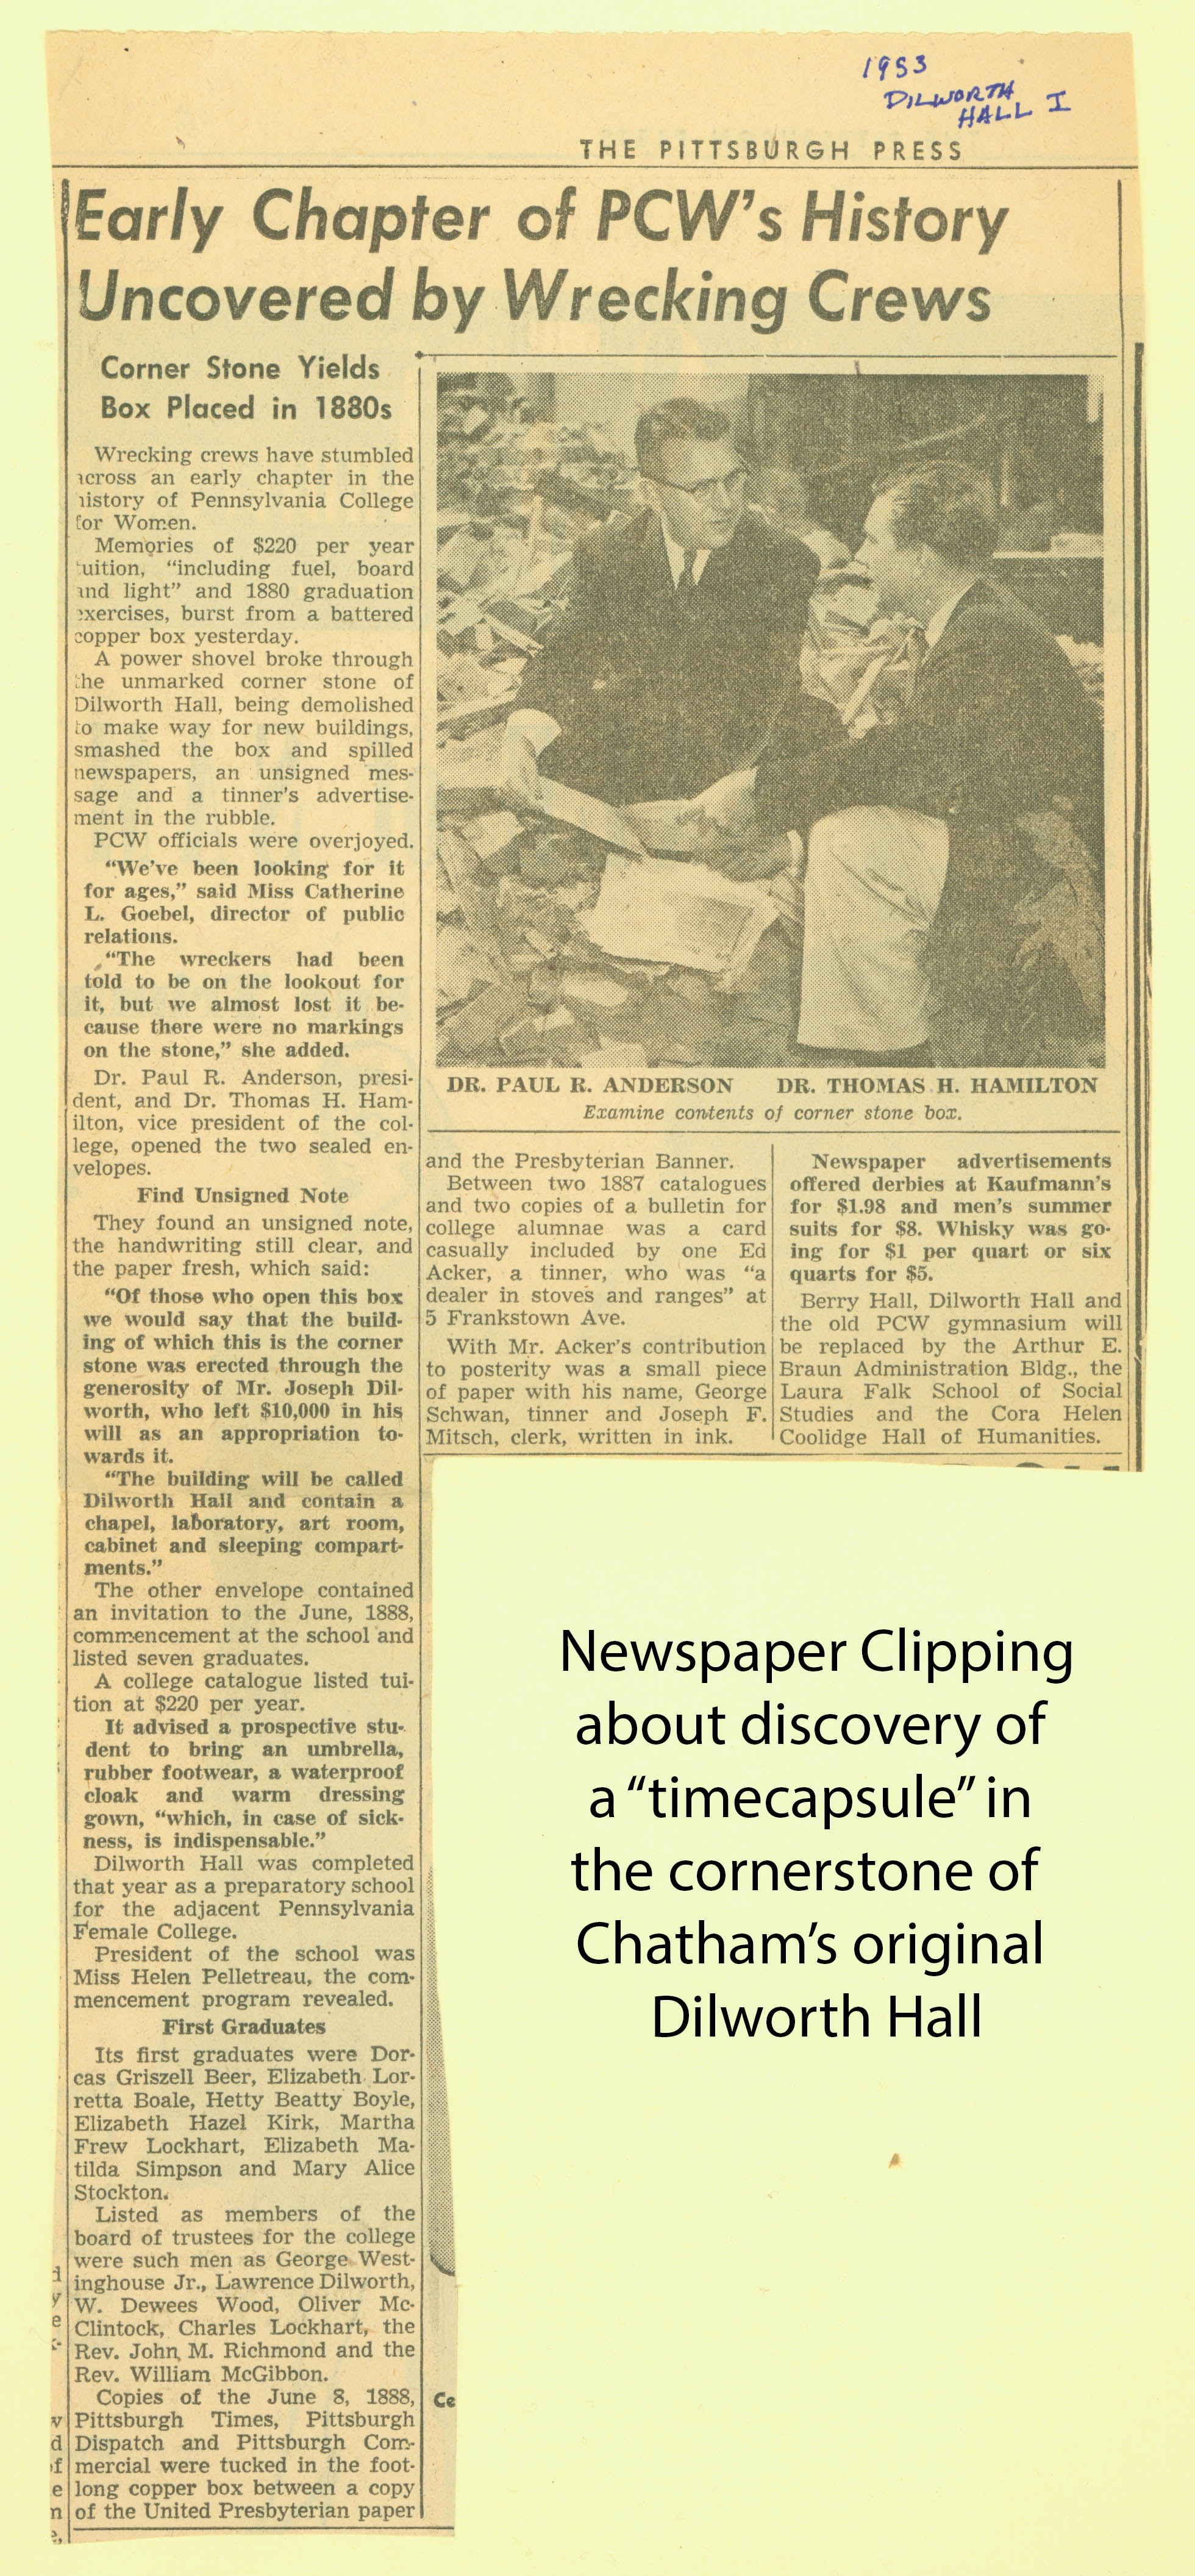 Newspaper clipping about PCW time capsule discovery